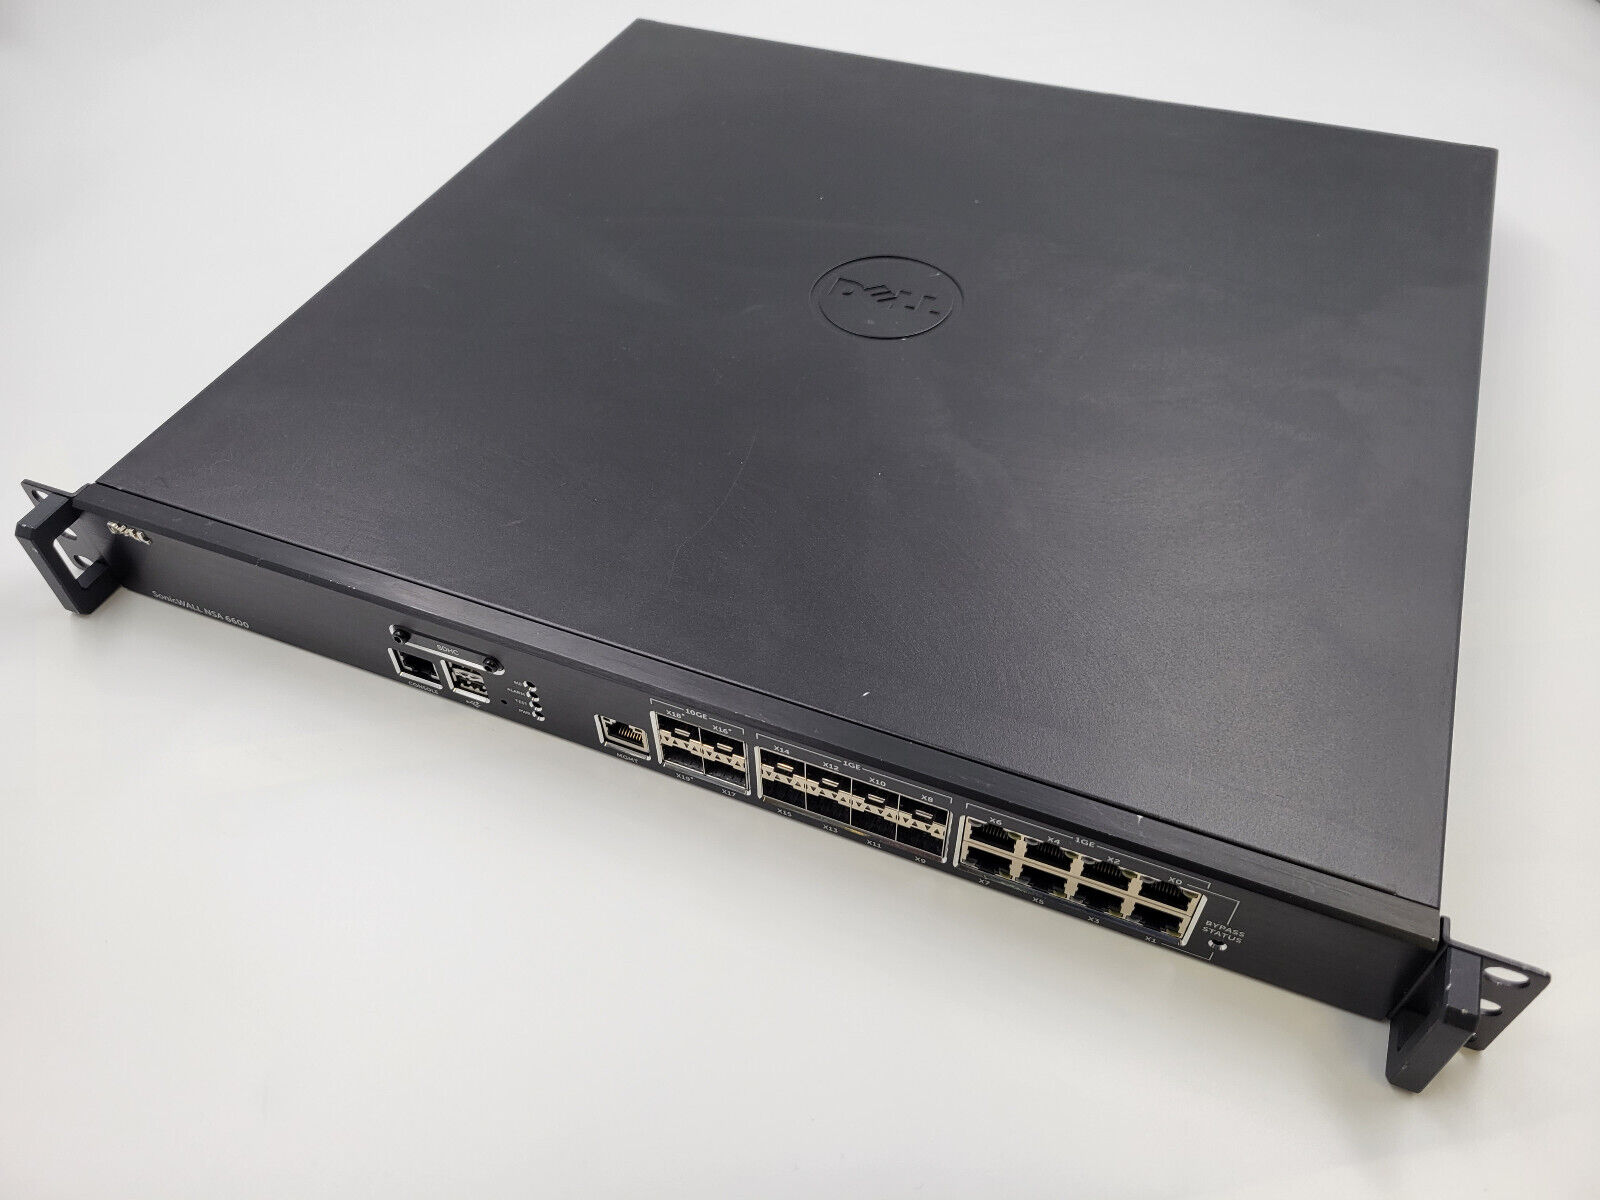 Dell SonicWall NSA 6600 Network Security Appliance Firewall Tested Working